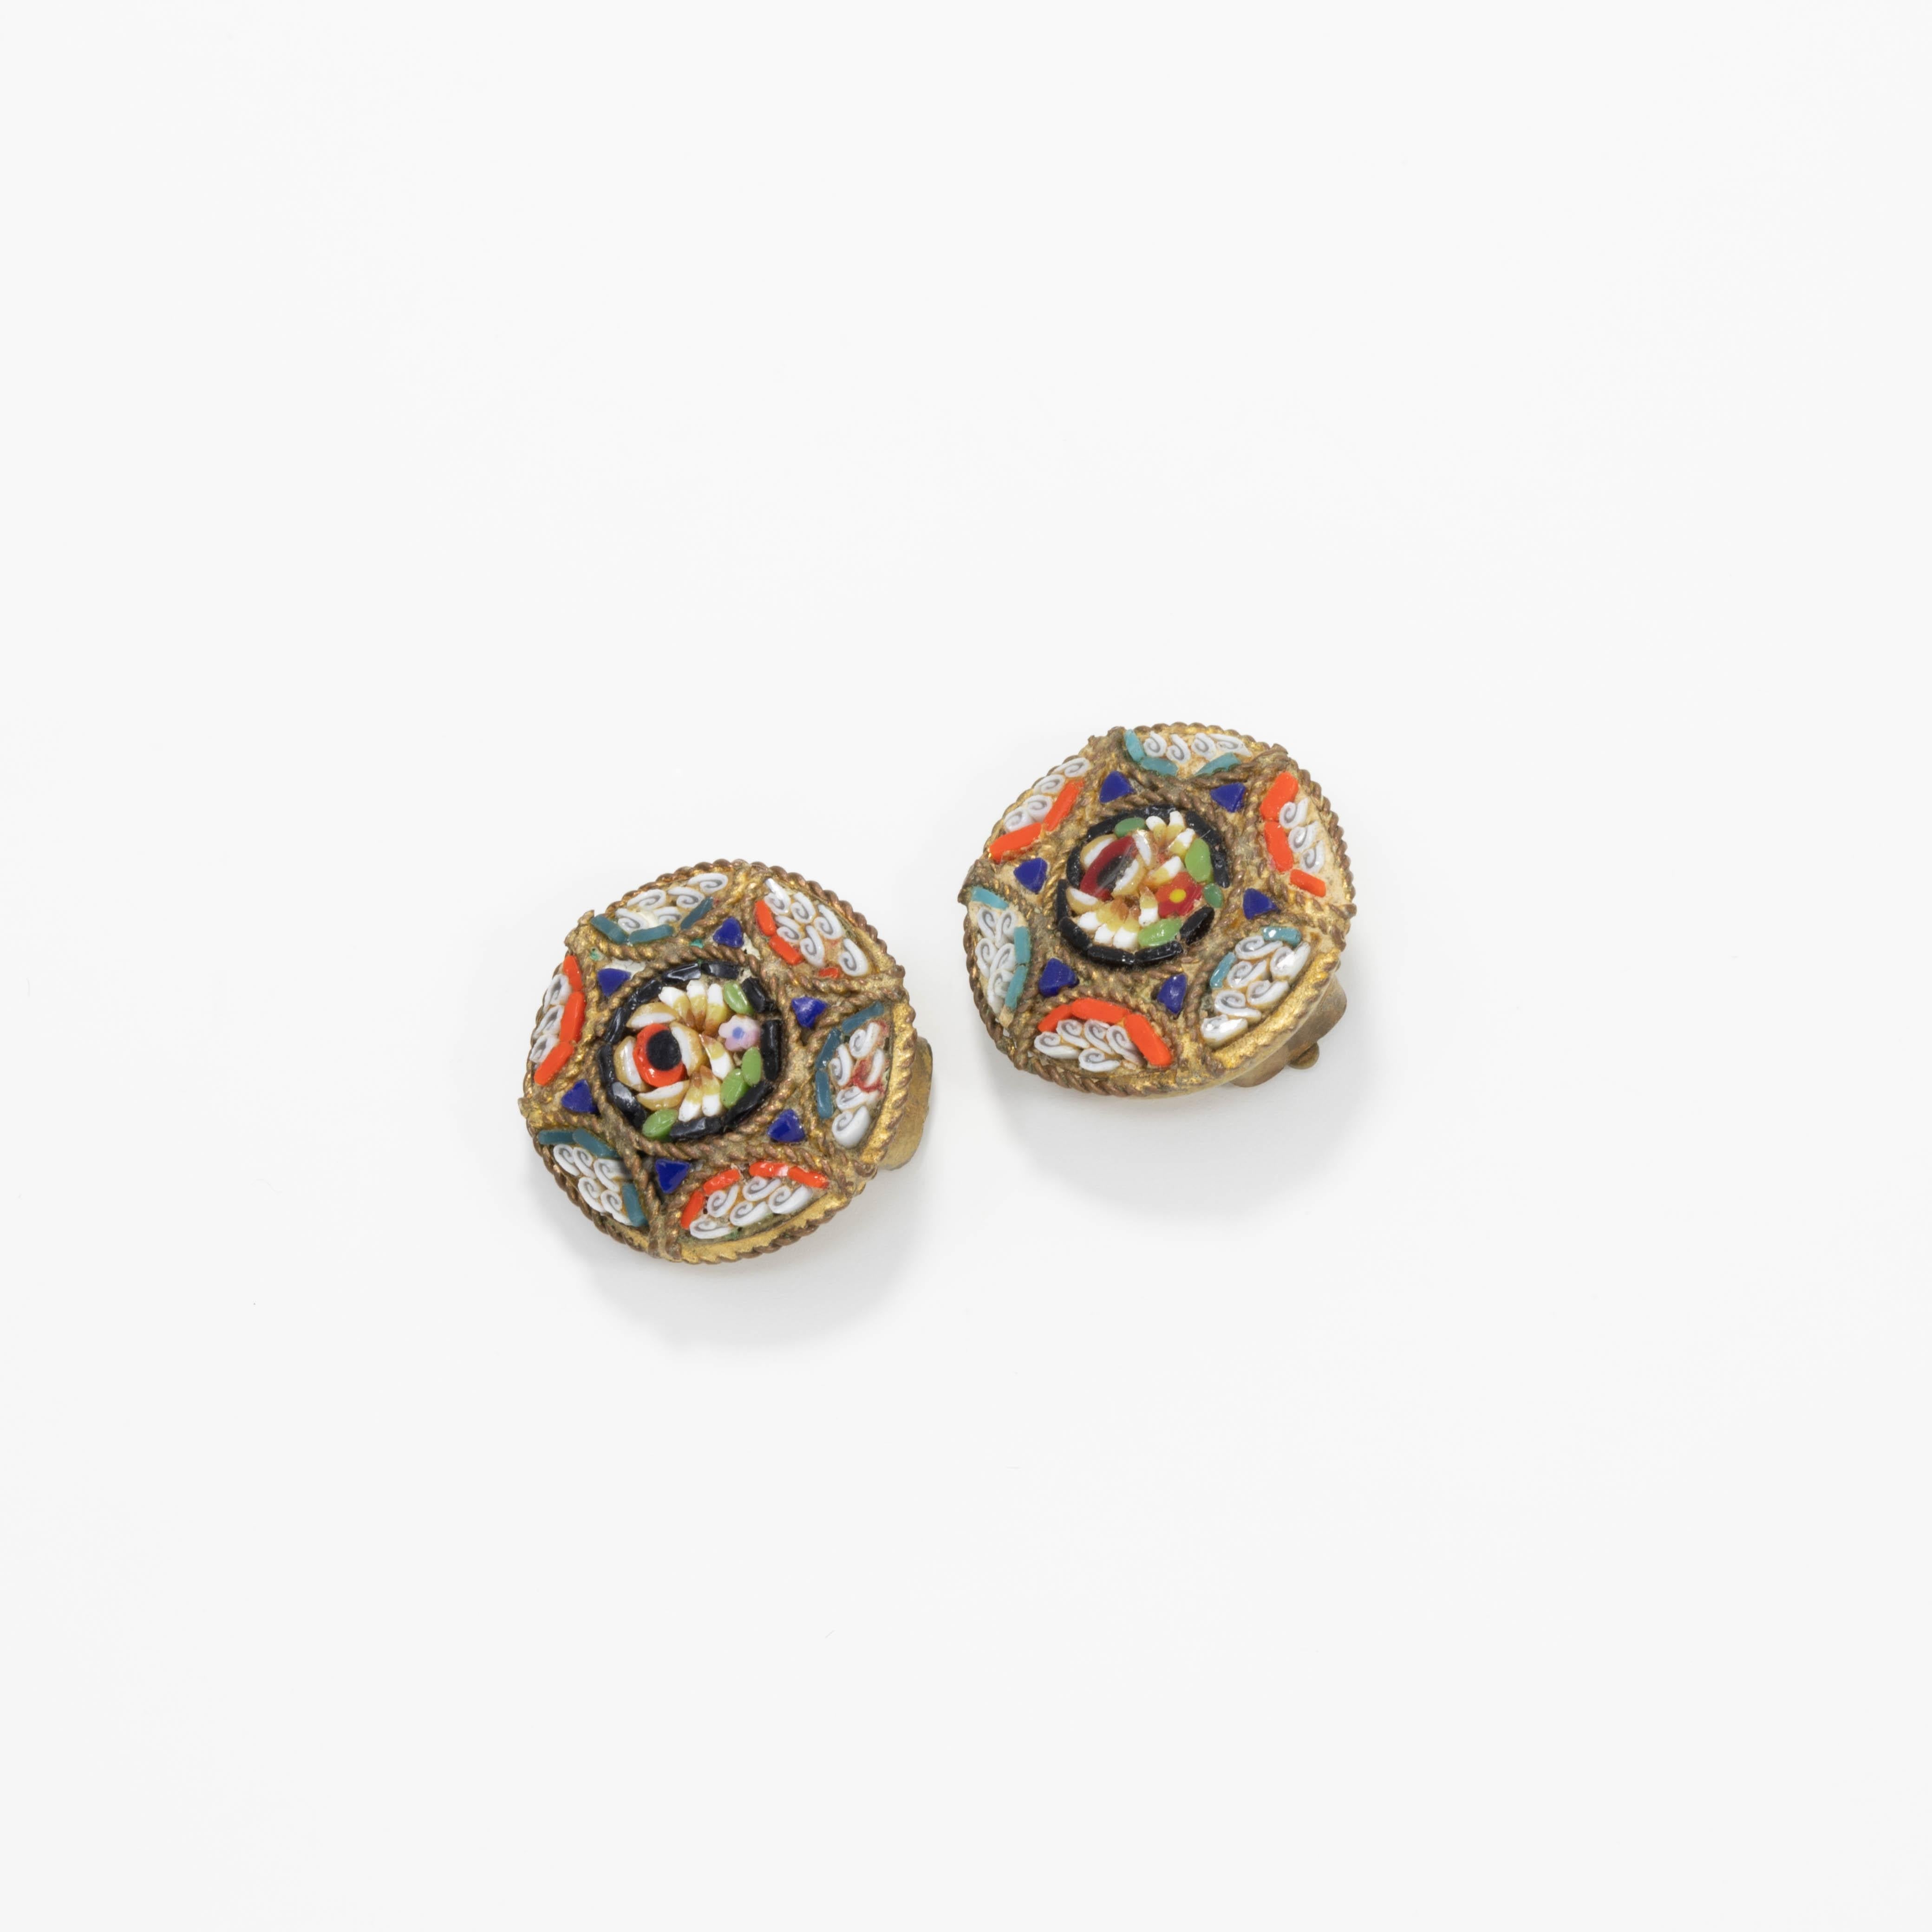 A pair of small but stylish Italian cloisonne button clip on earrings with blue, orange, white, and green floral motifs. Brass-tone setting.

Tags, Marks, Hallmarks: Italy (one earring)